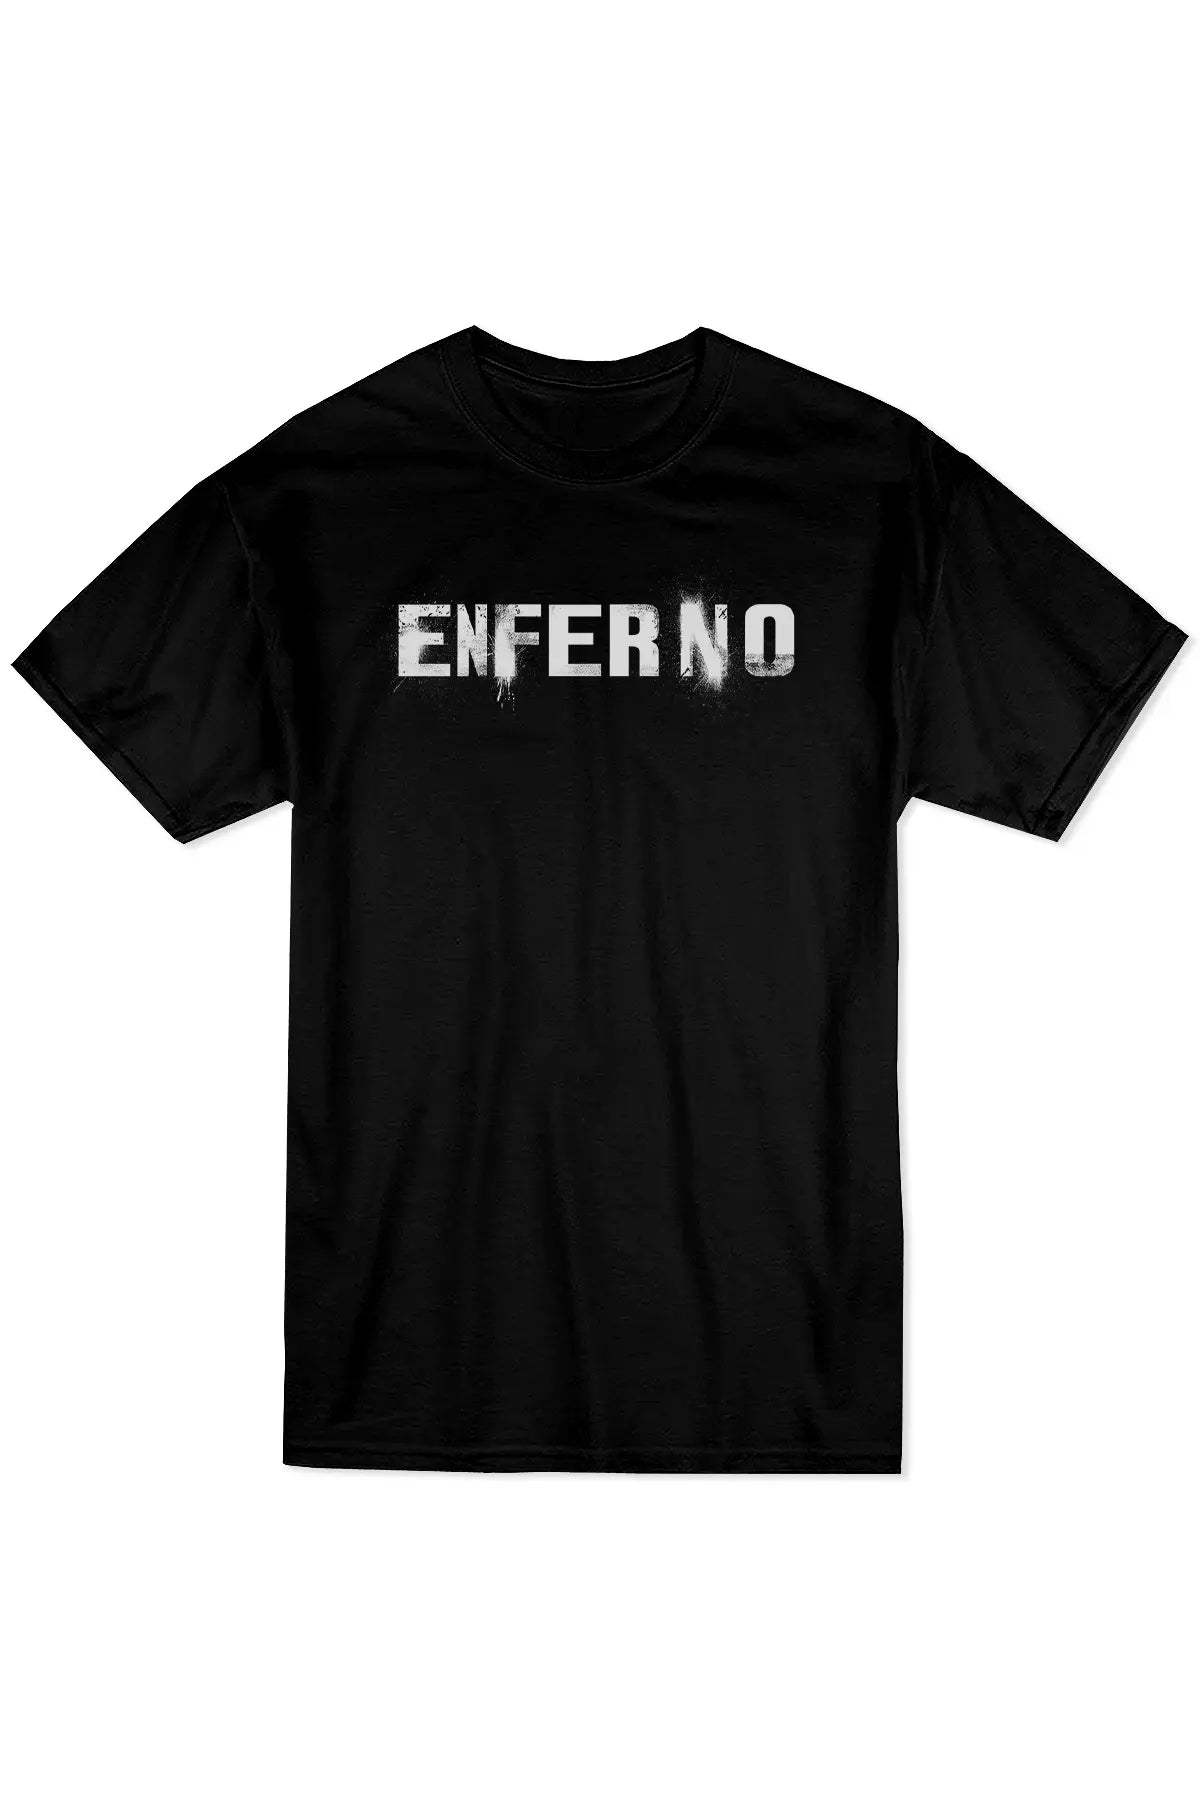 Enferno Fight Logo Tee in Black.